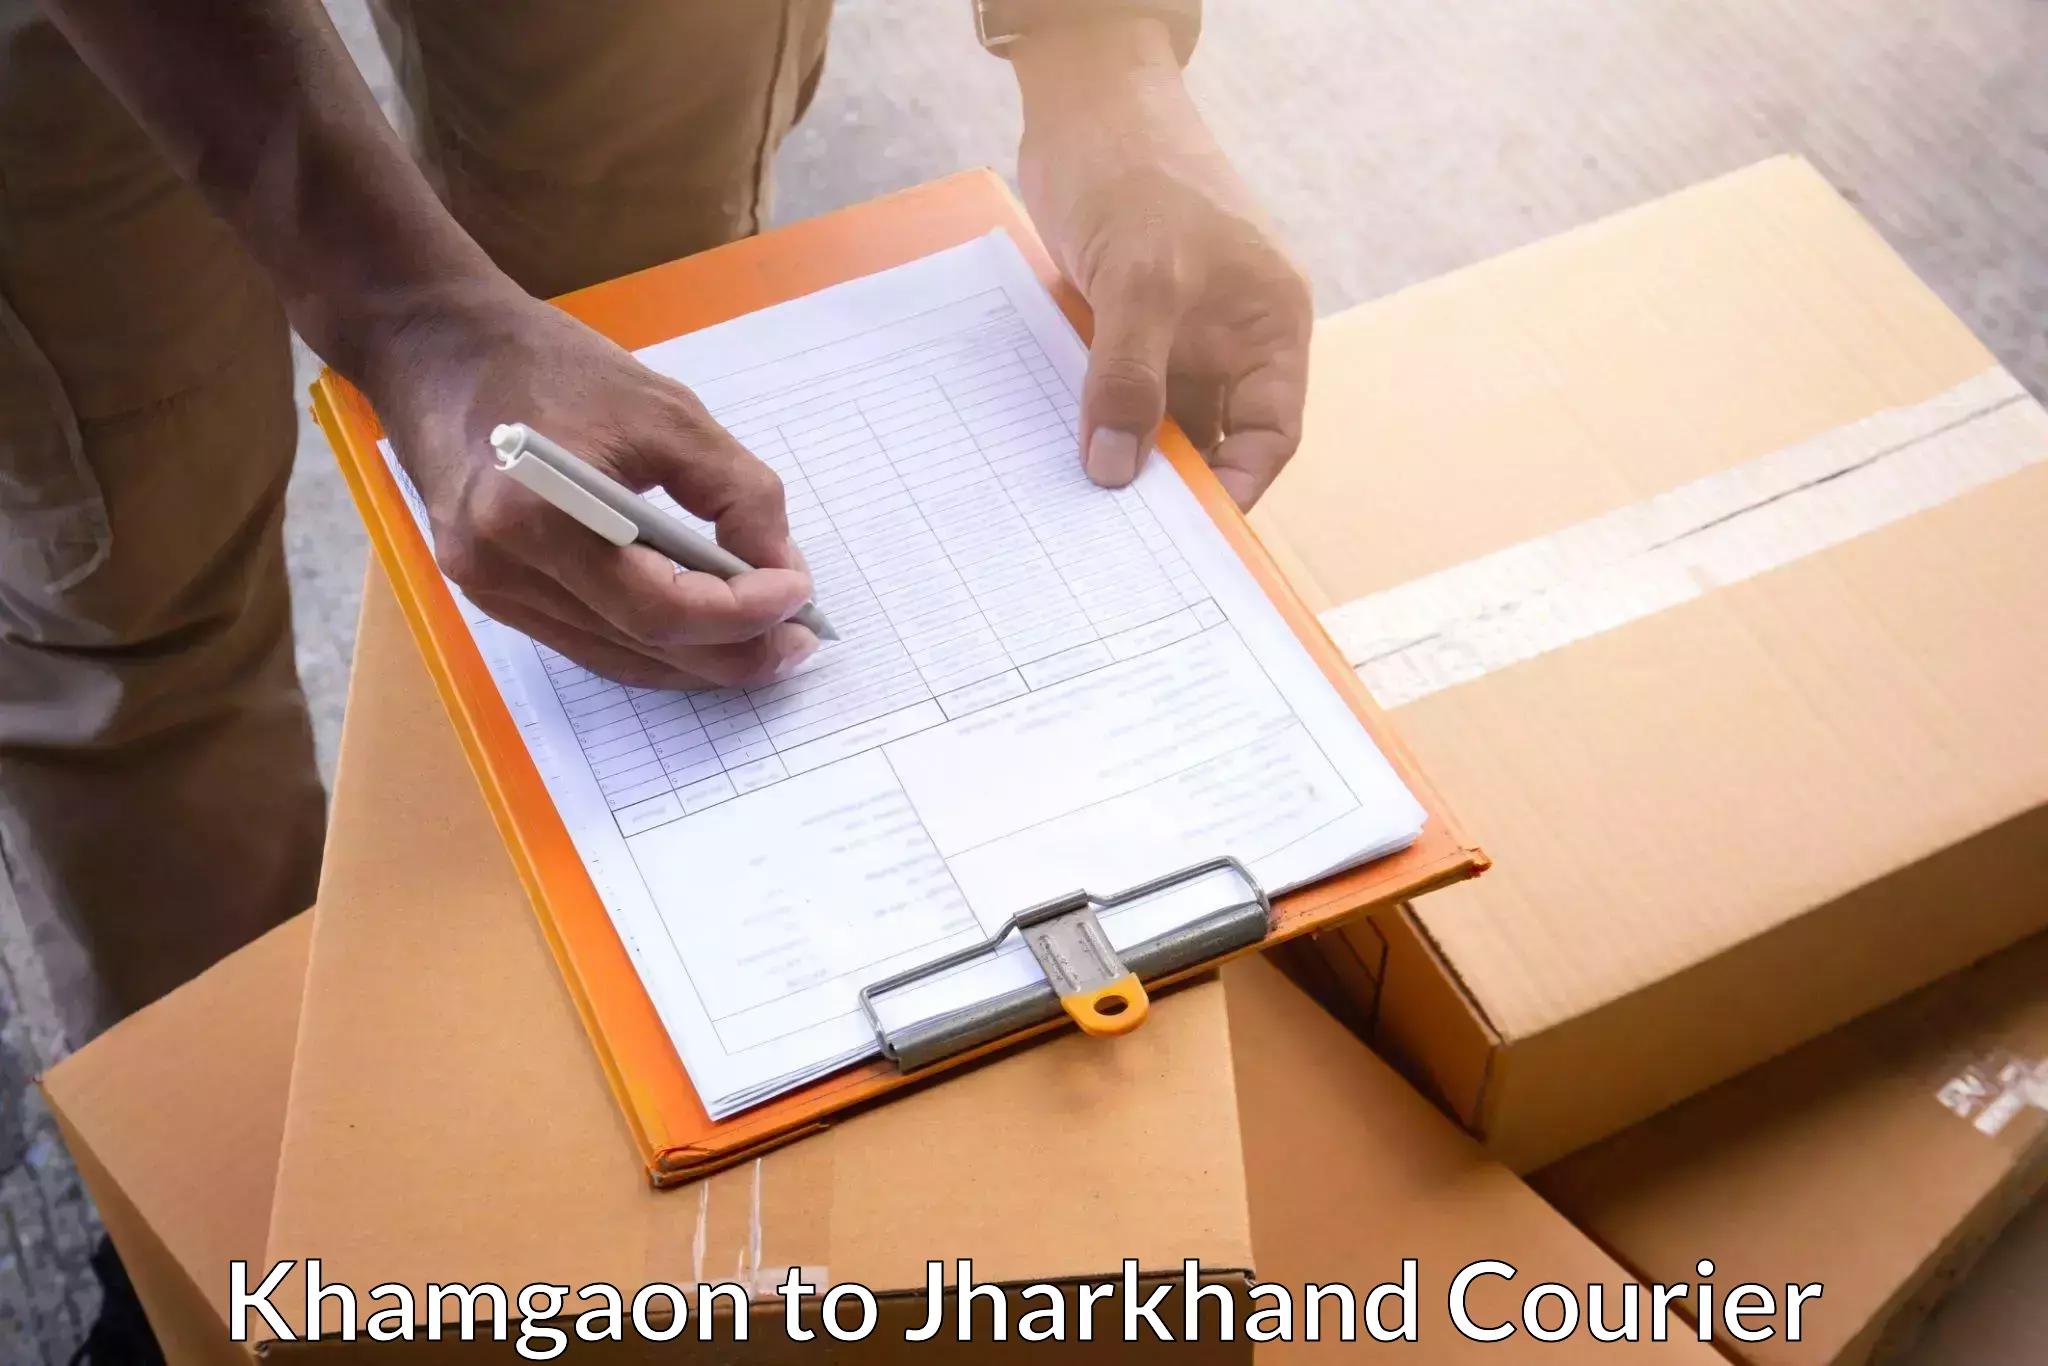 Efficient package consolidation in Khamgaon to Bara Boarijor